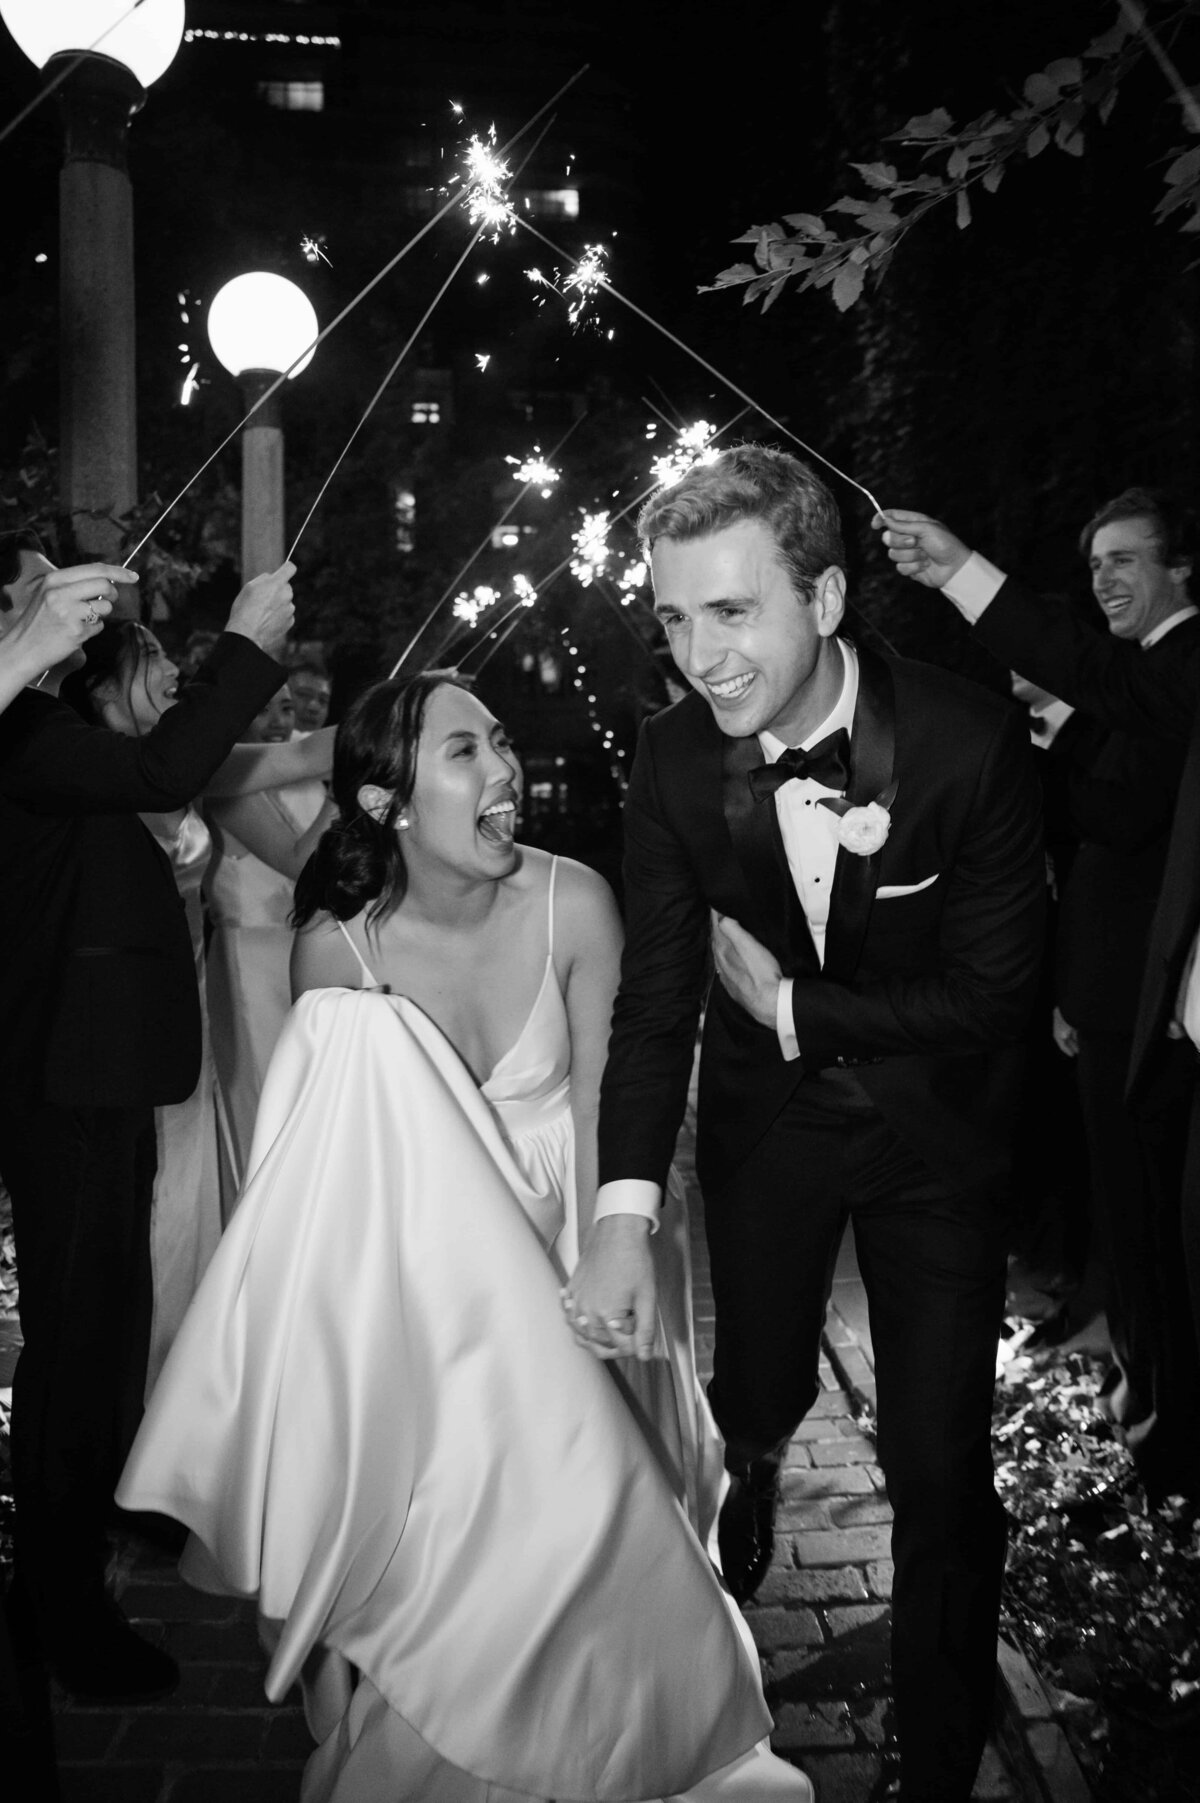 Black and white image of bride and groom exiting The Ivy Room among sparklers and guest.